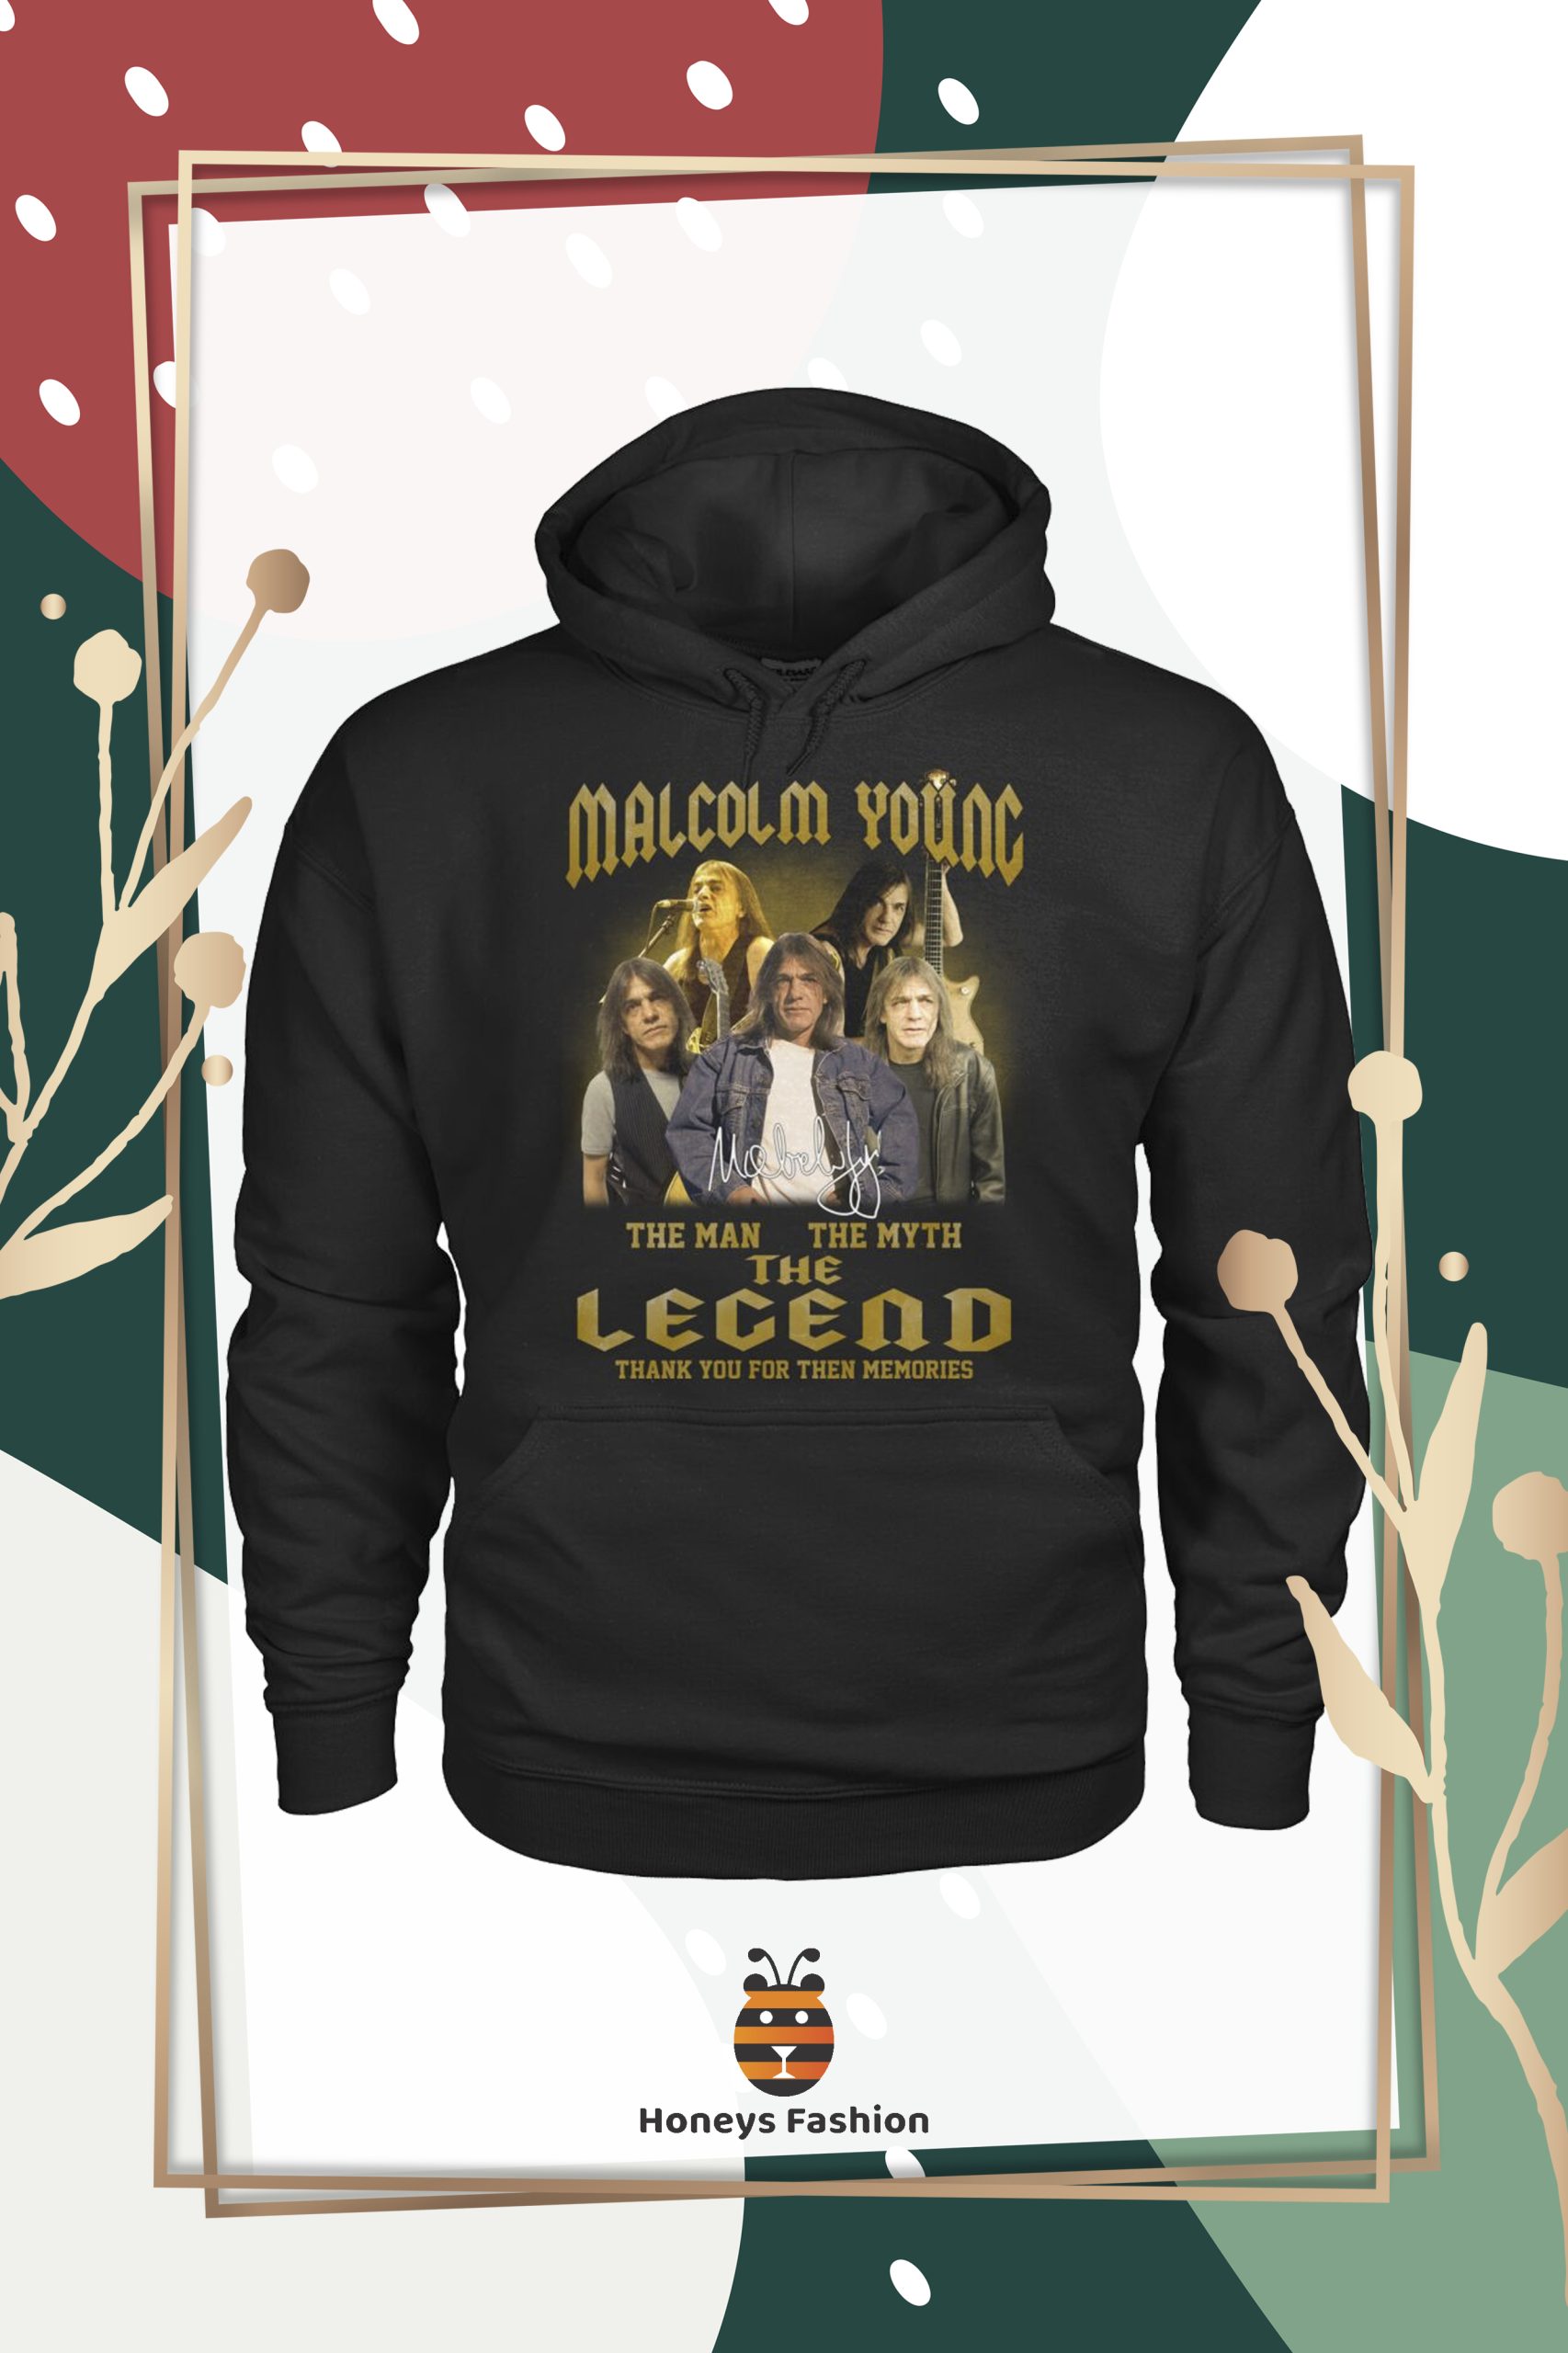 Malcolm Young The Man The Myth The Legend Shirt